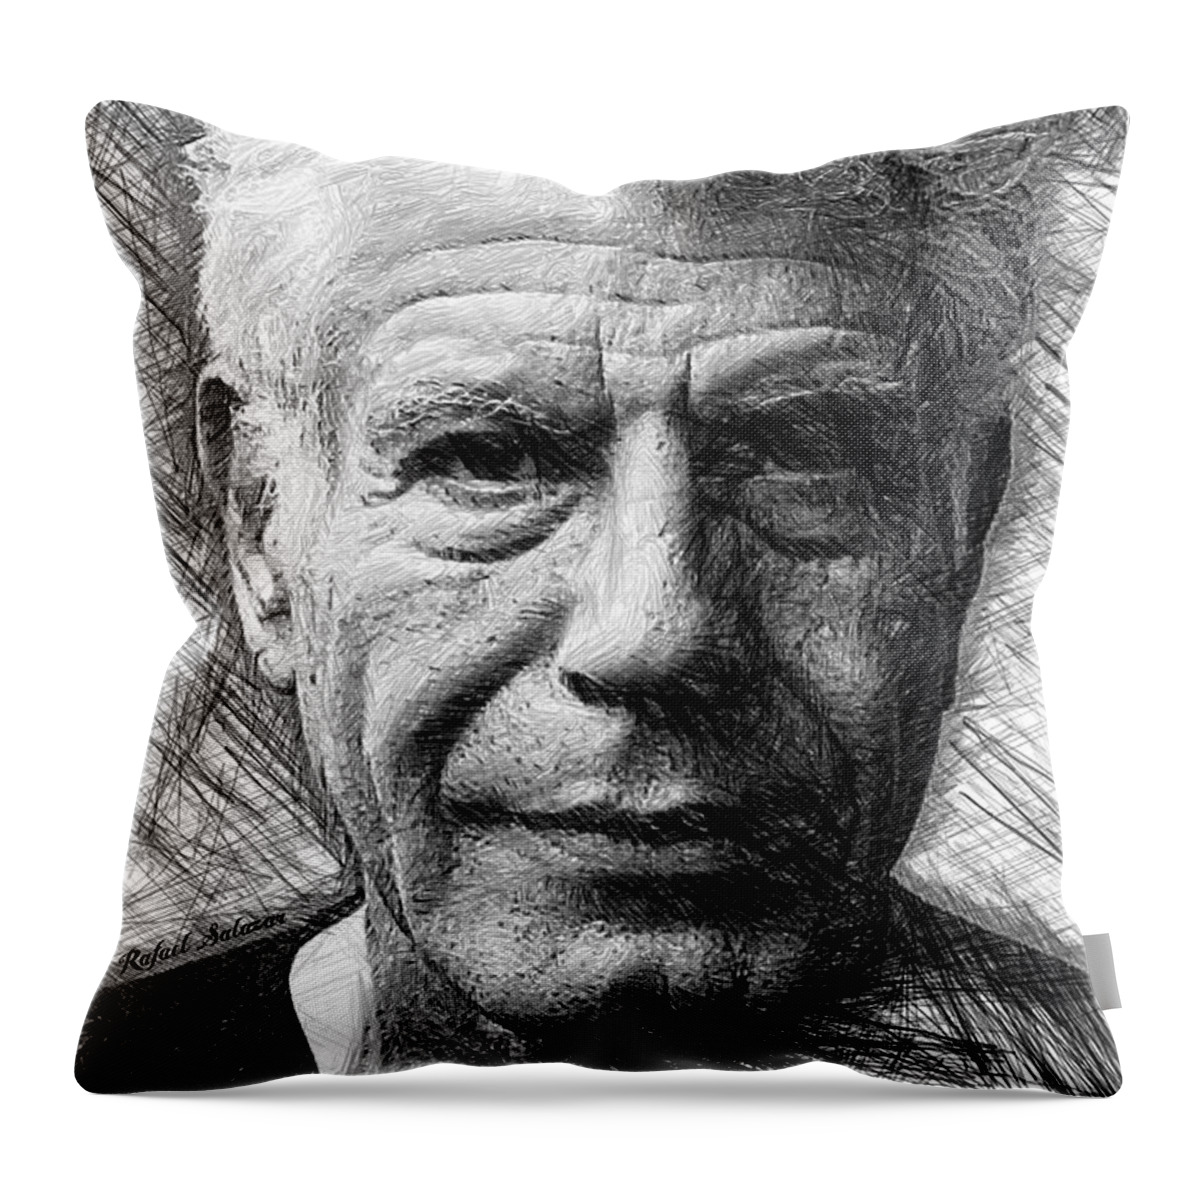 Rafael Salazar Throw Pillow featuring the drawing Anthony Bourdain - Ink Drawing by Rafael Salazar